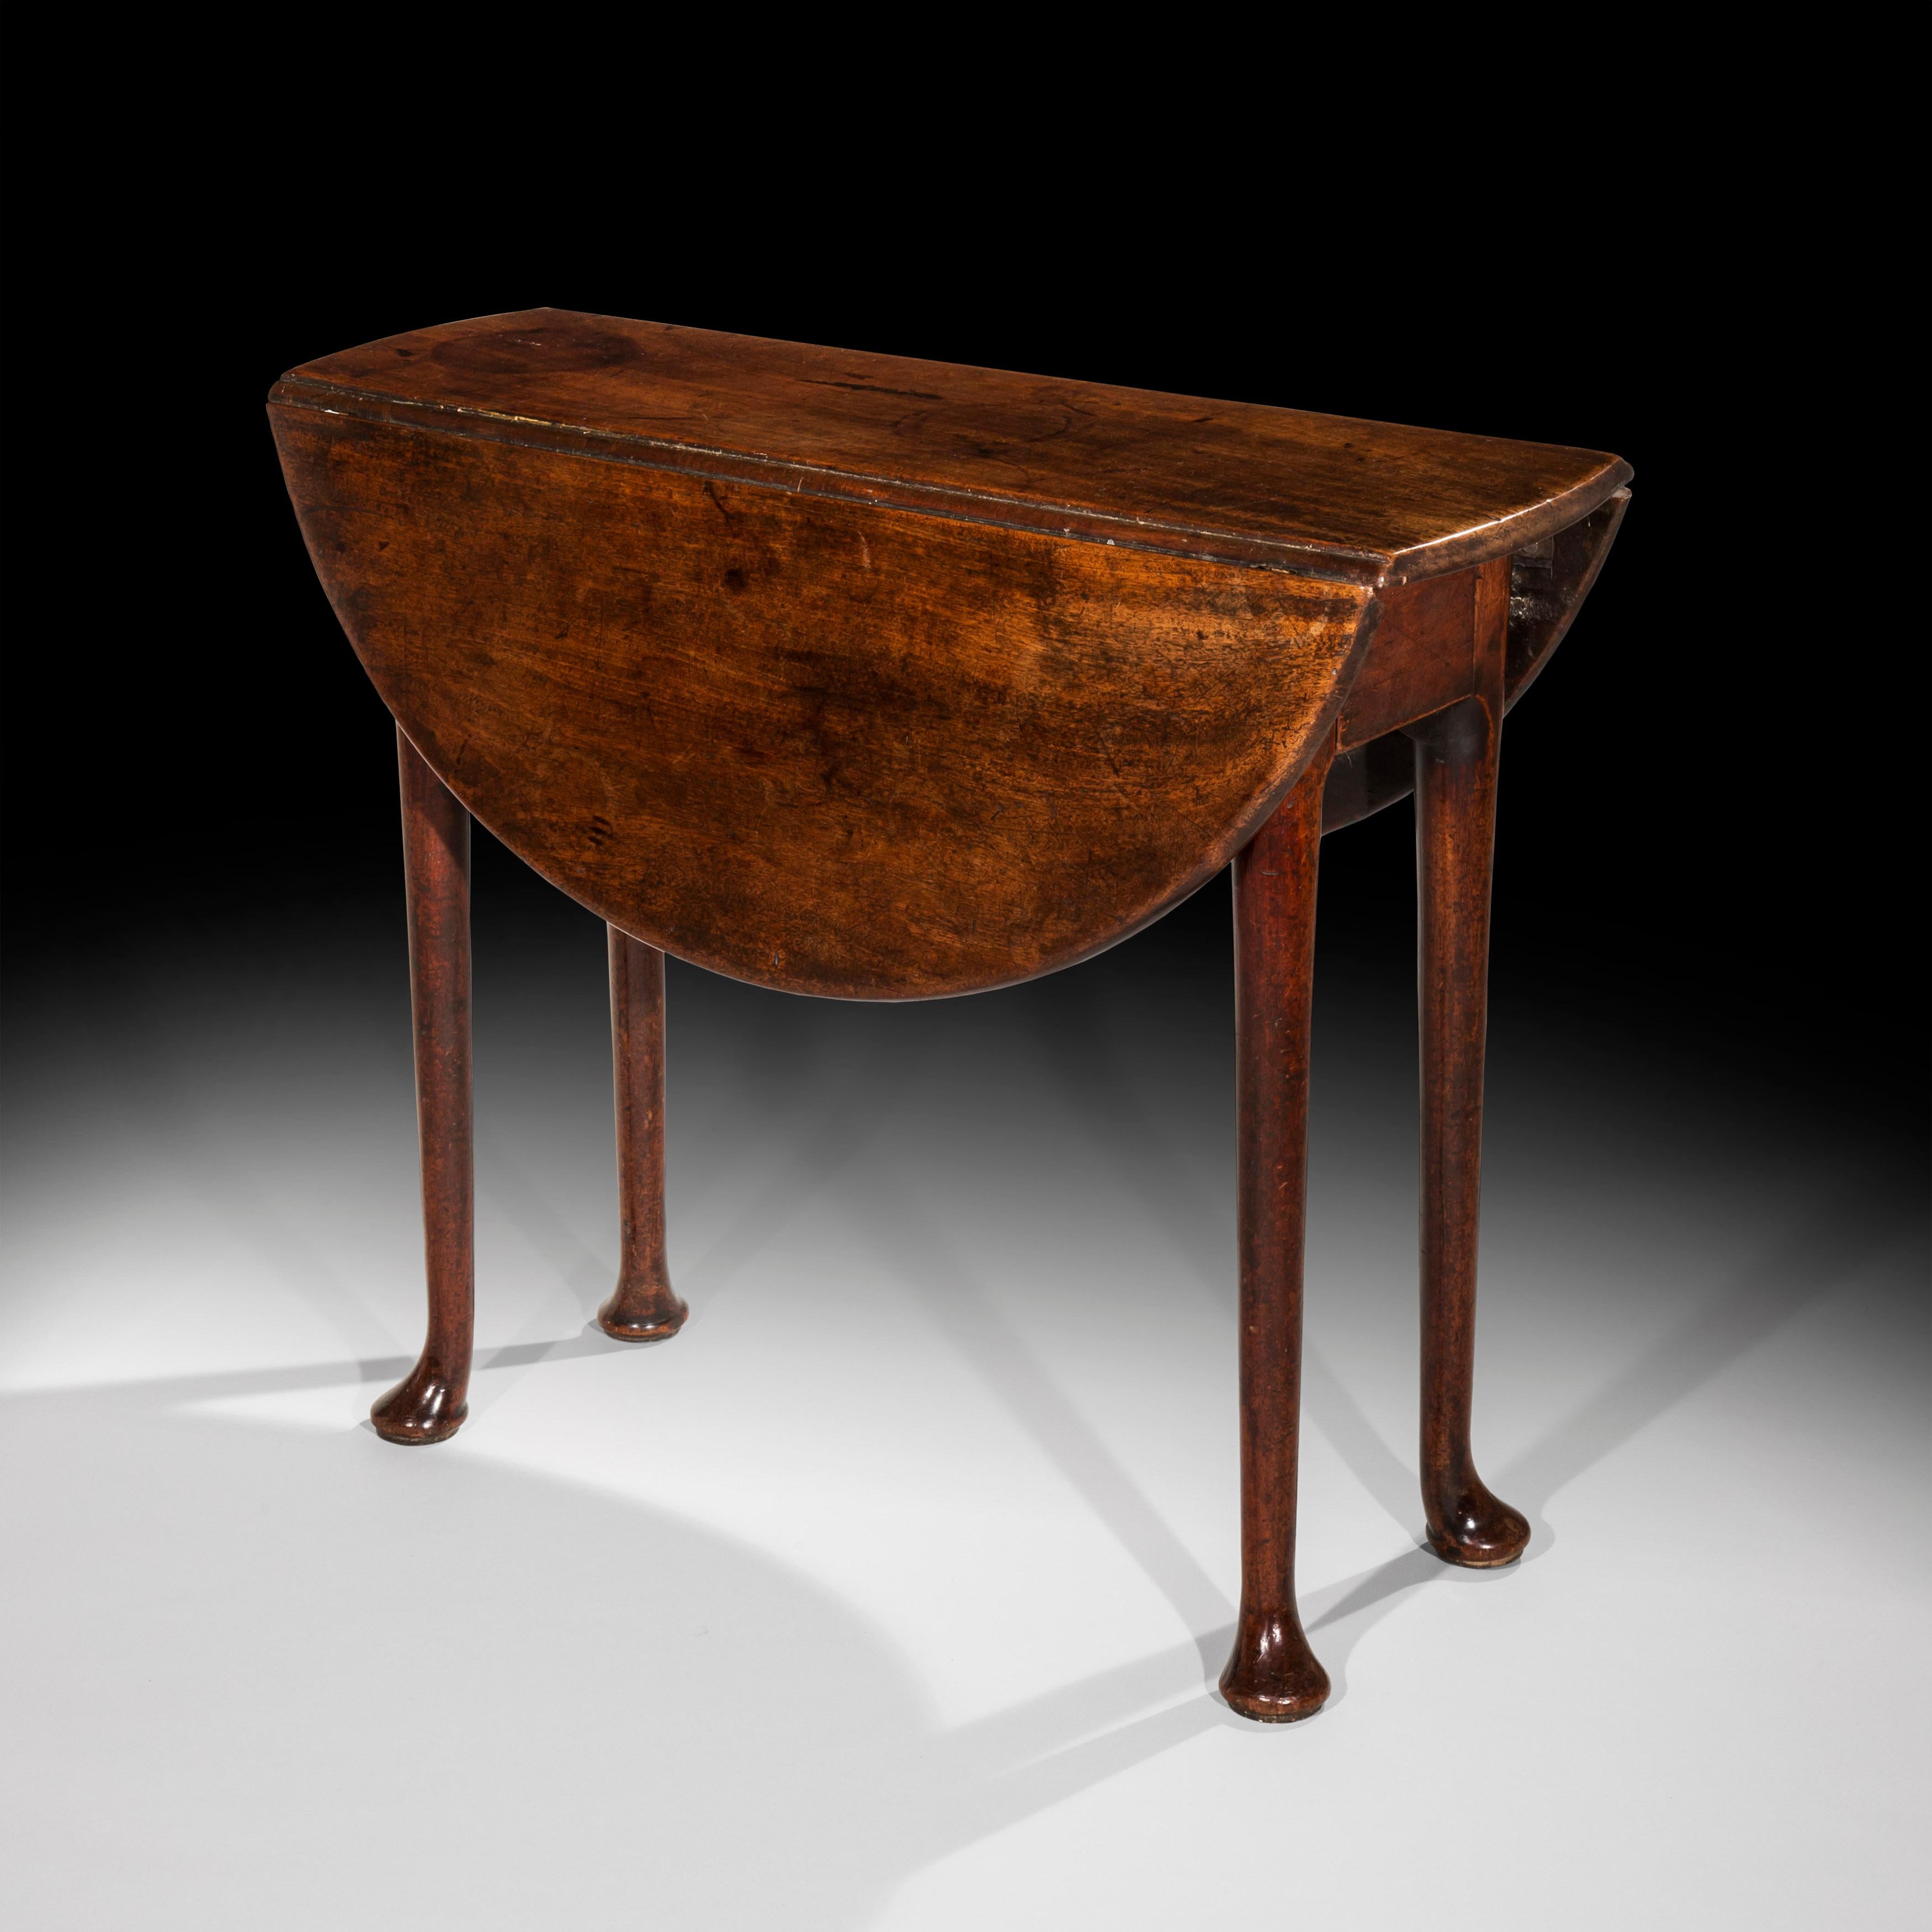 Just 11 inches deep with flaps down - very rare small table.

A minimalist early 18th century English provincial George II period oval drop-leaf table of rare shallow proportions, in red walnut, of wonderful original color and patination,

circa